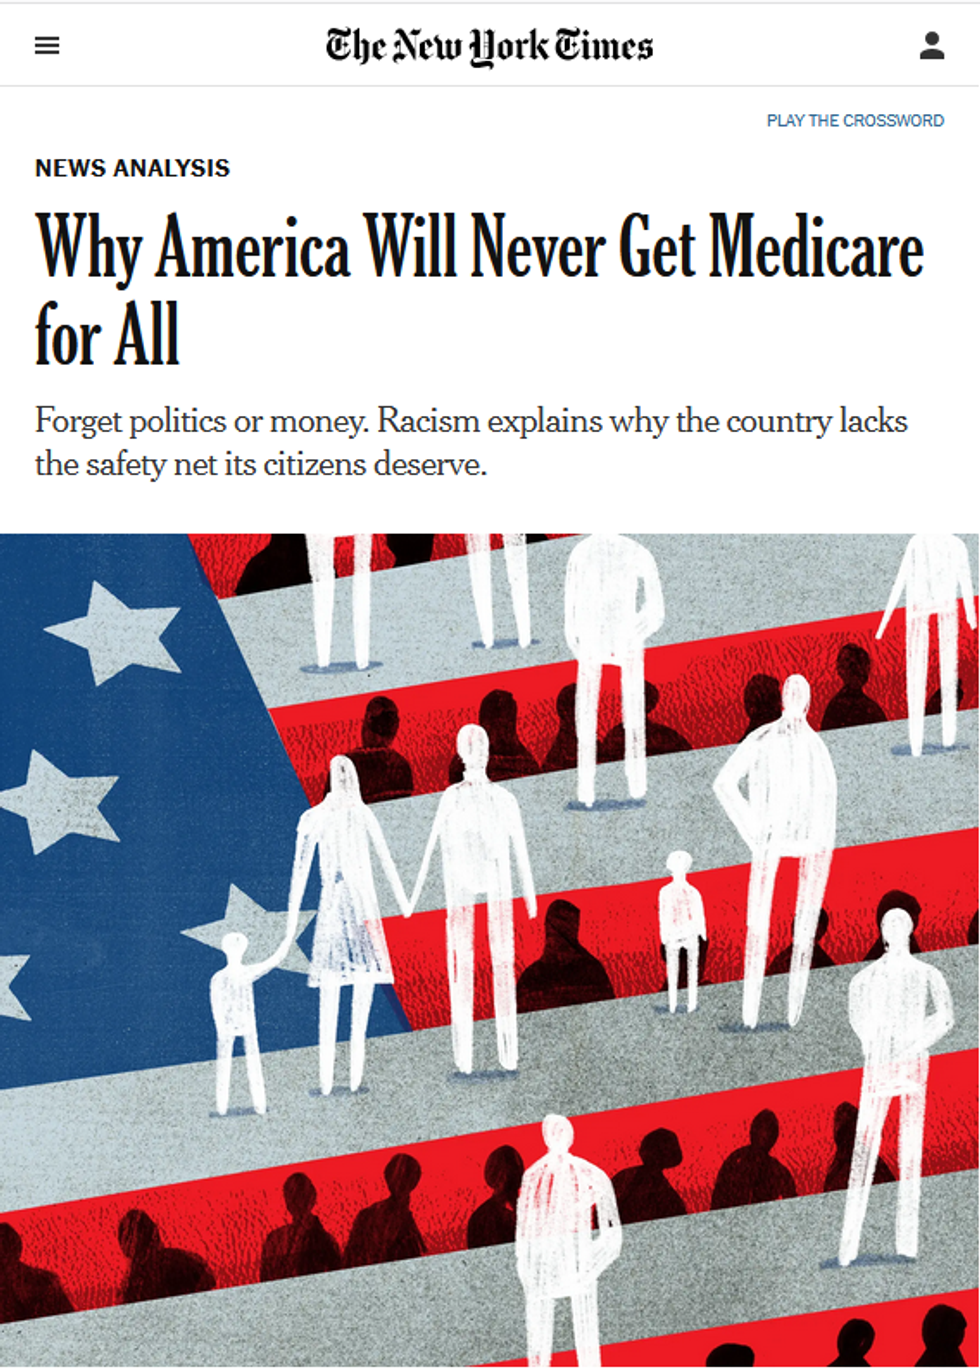 NYT: Why America Will Never Get Medicare for All